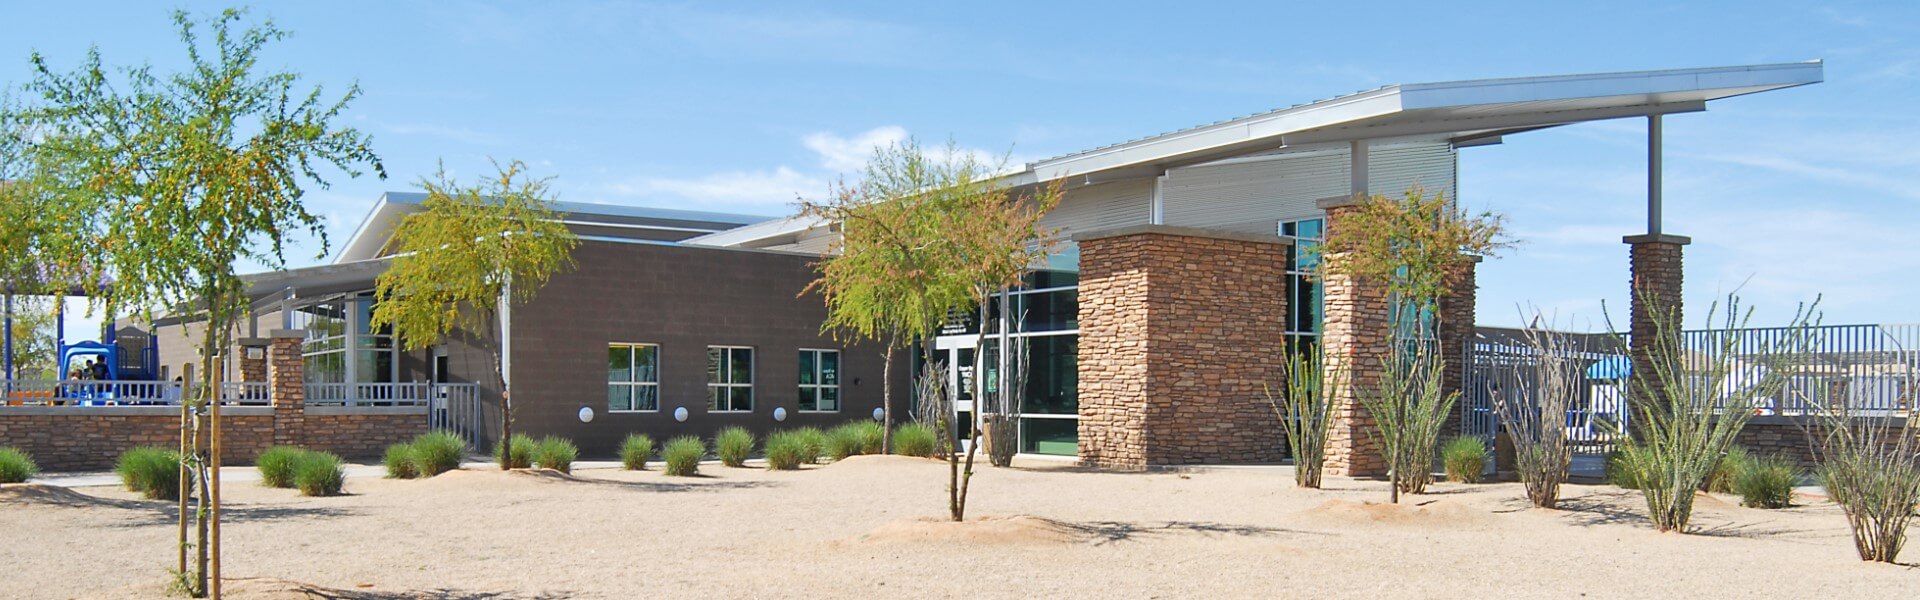 Exterior of YMCA Chauncey Ranch facility in Arizona